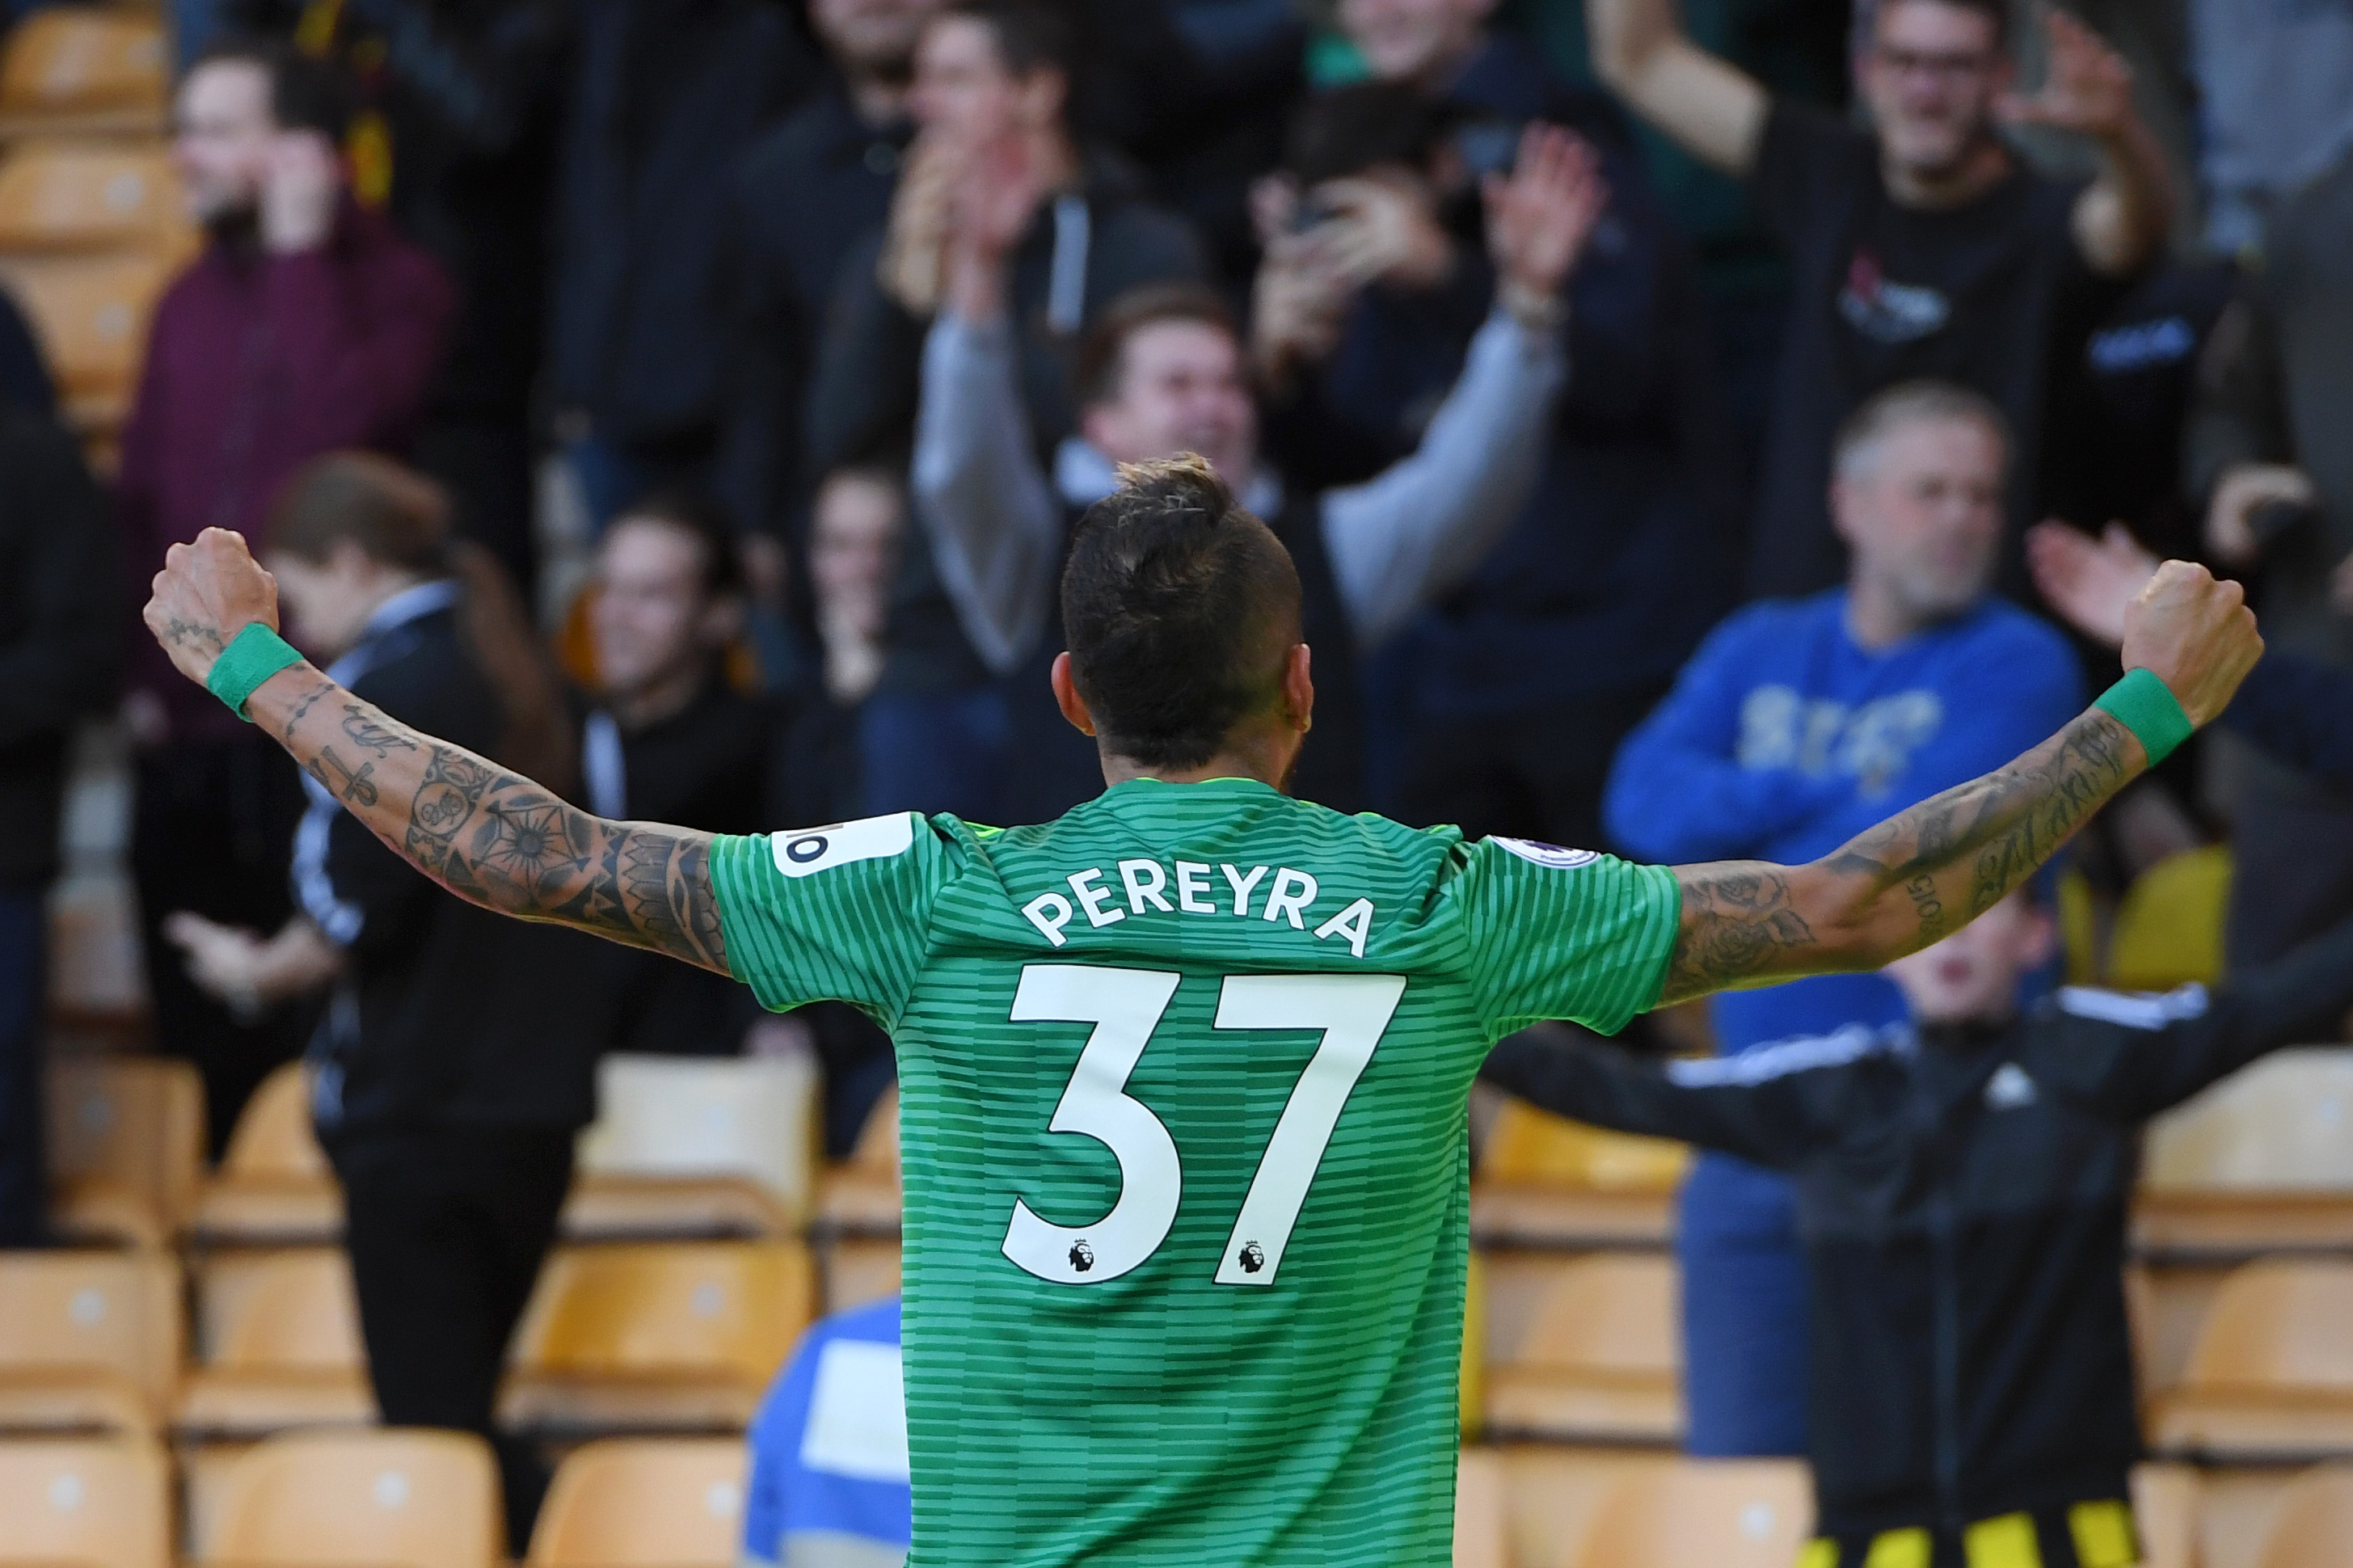 WOLVERHAMPTON, ENGLAND - OCTOBER 20:  Roberto Pereyra of Watford celebrates after scoring his team's second goal during the Premier League match between Wolverhampton Wanderers and Watford FC at Molineux on October 20, 2018 in Wolverhampton, United Kingdom.  (Photo by Ross Kinnaird/Getty Images)